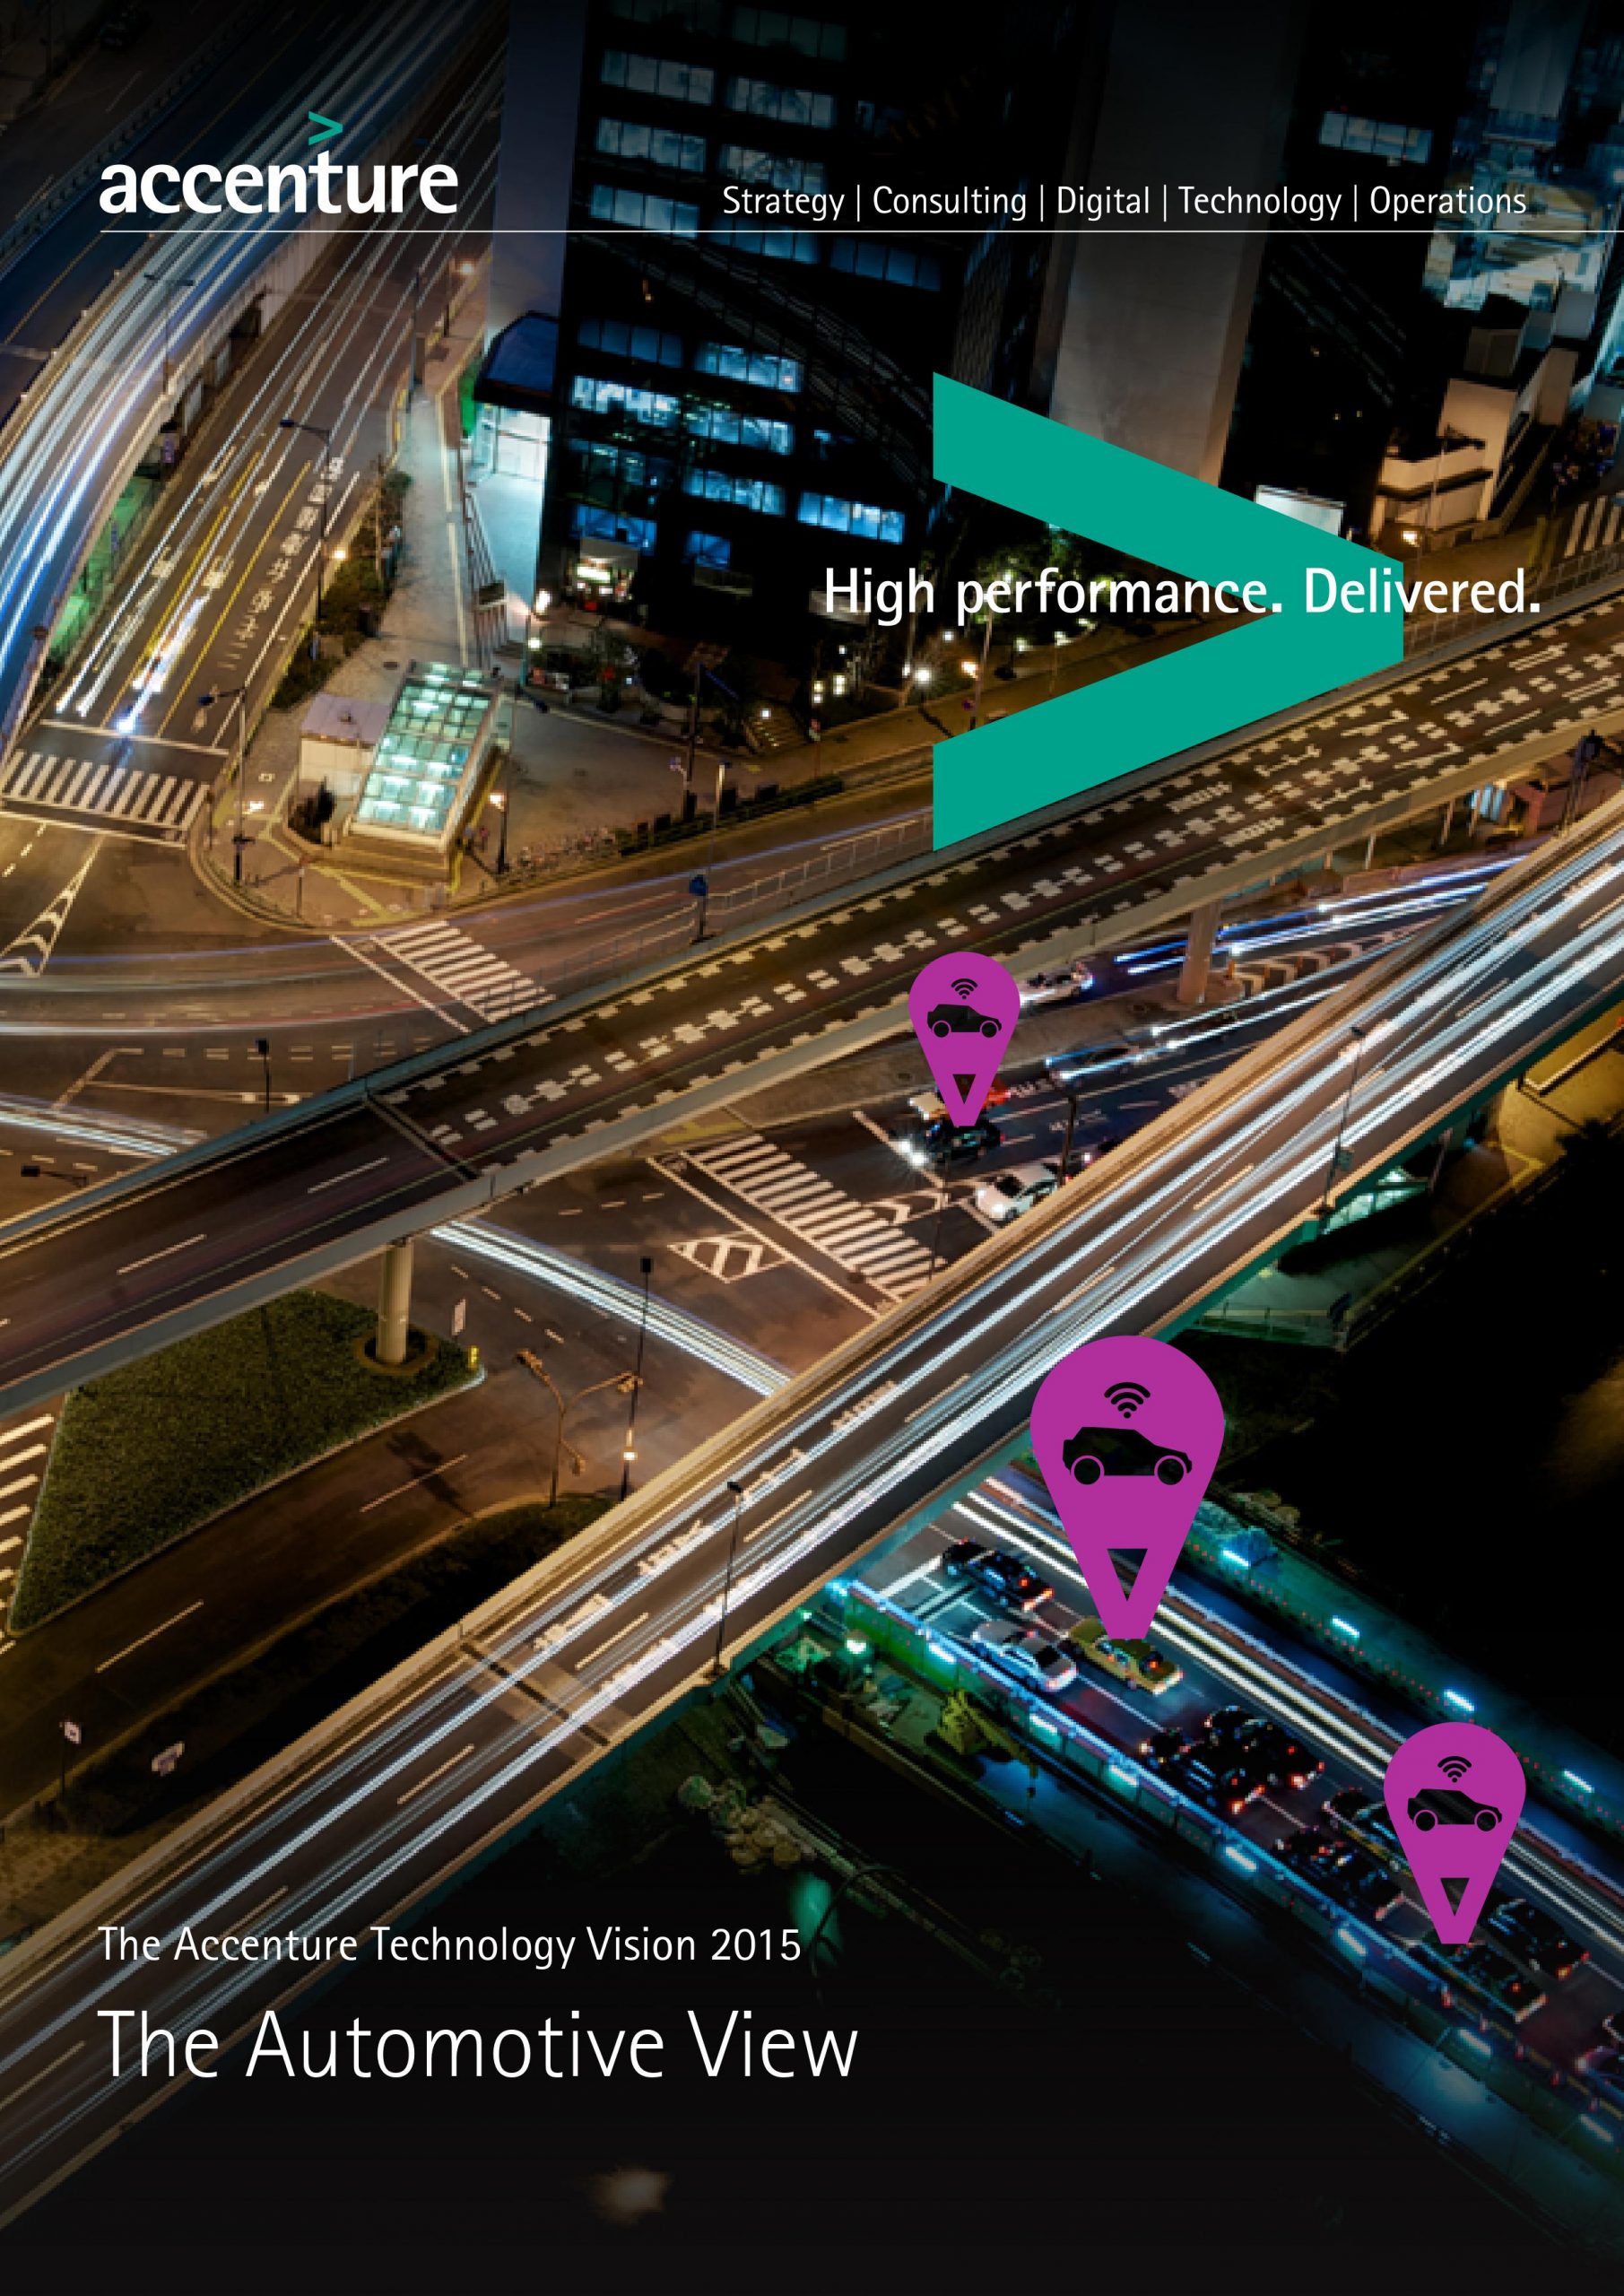 1The Accenture Technology Vision 2015 The Automotive View